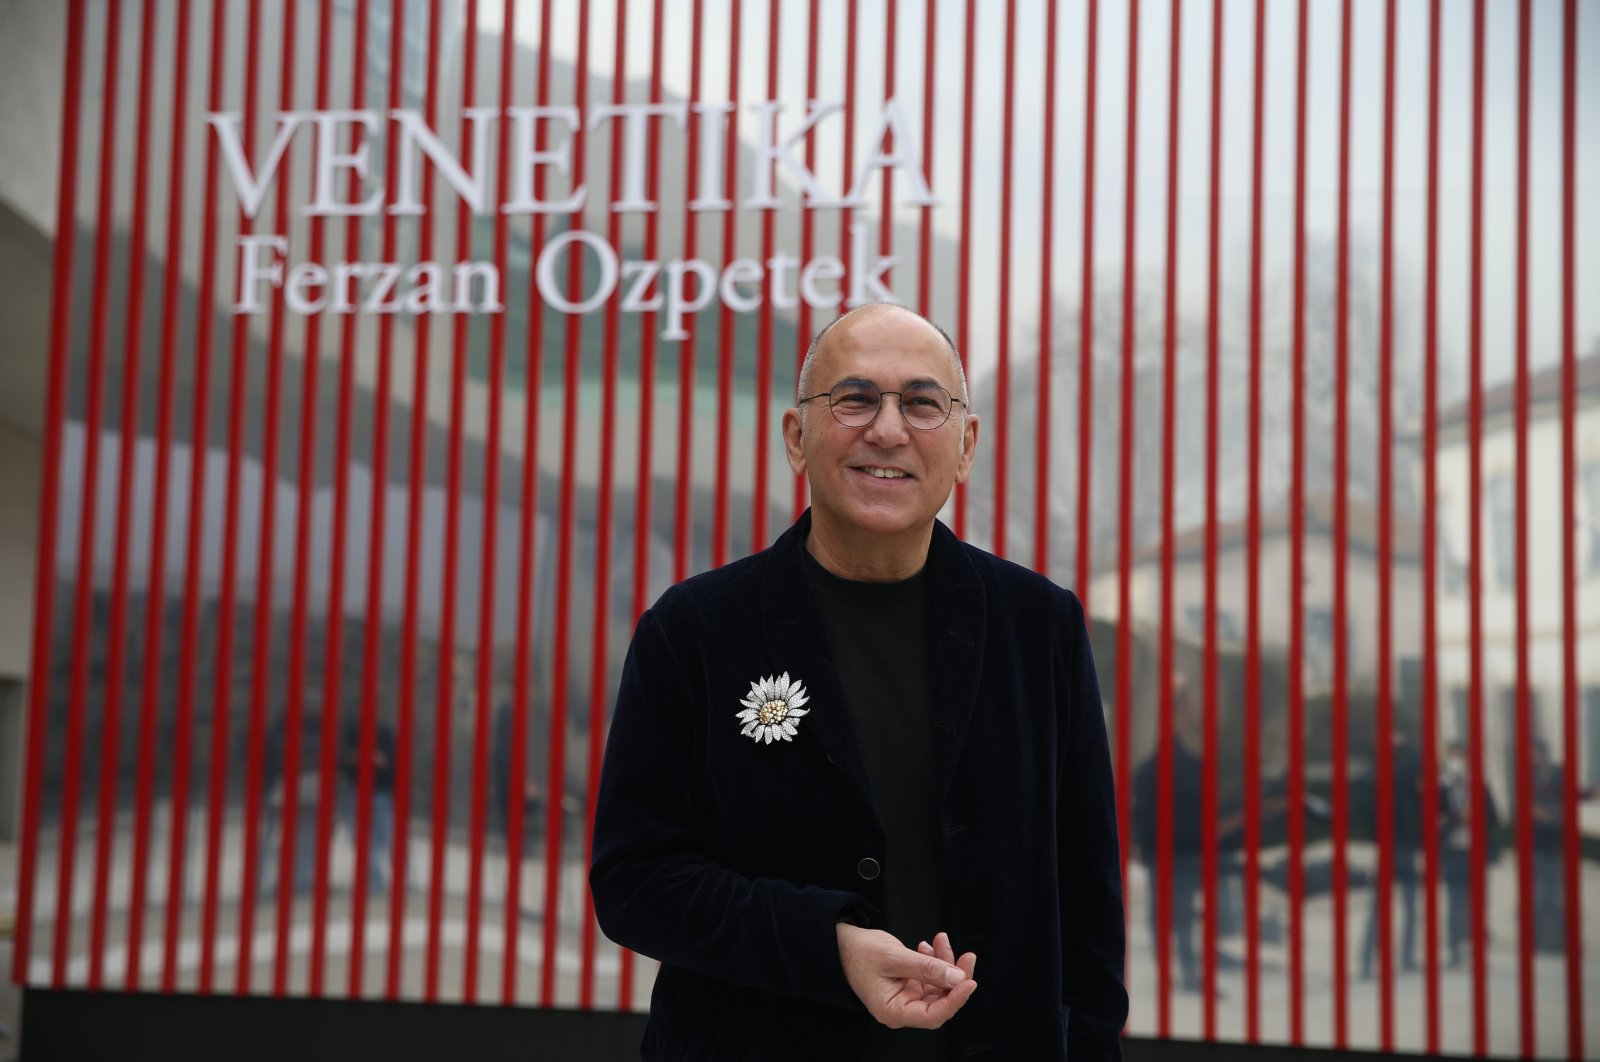 Ferzan Özpetek poses in front of the red cube where his installation &quot;Venetika&quot; is exhibited at MAXXI, Rome, Italy, March 28, 2022. (AA Photo)